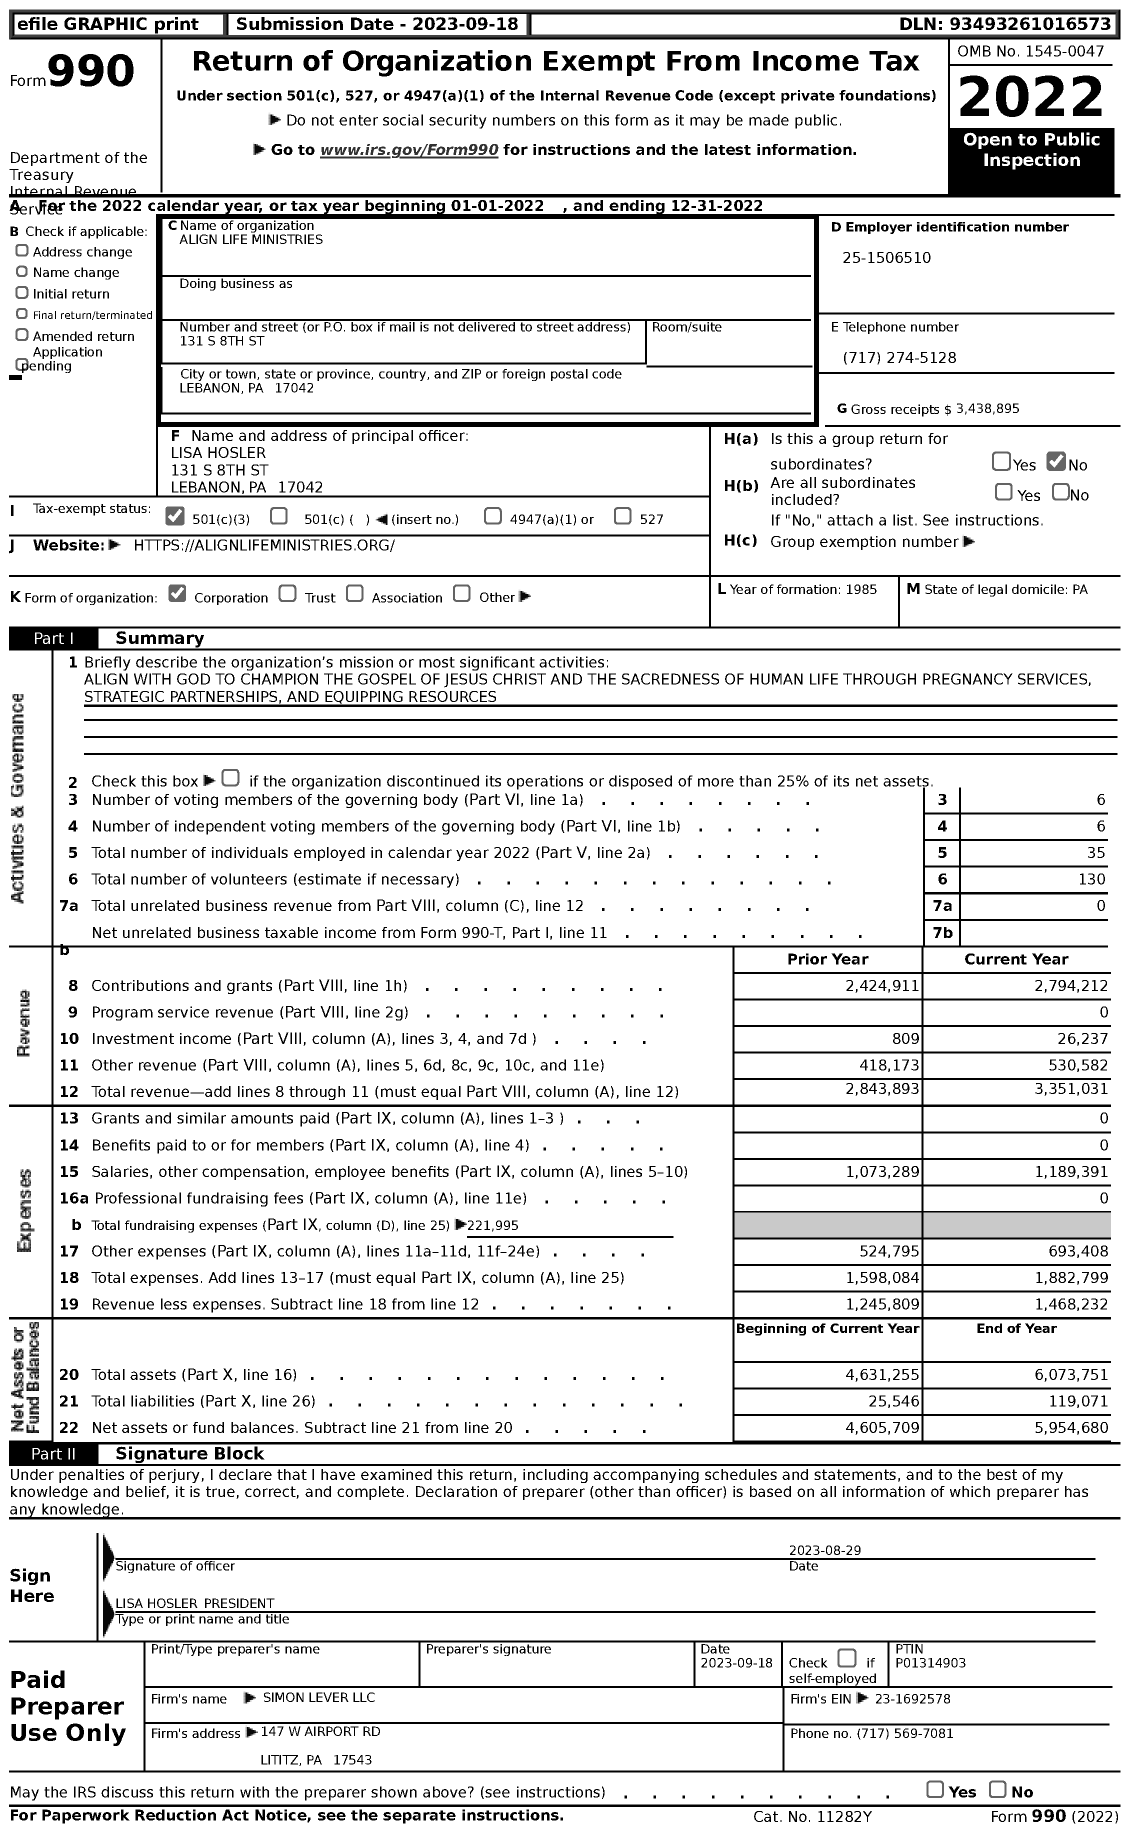 Image of first page of 2022 Form 990 for Align Life Ministries